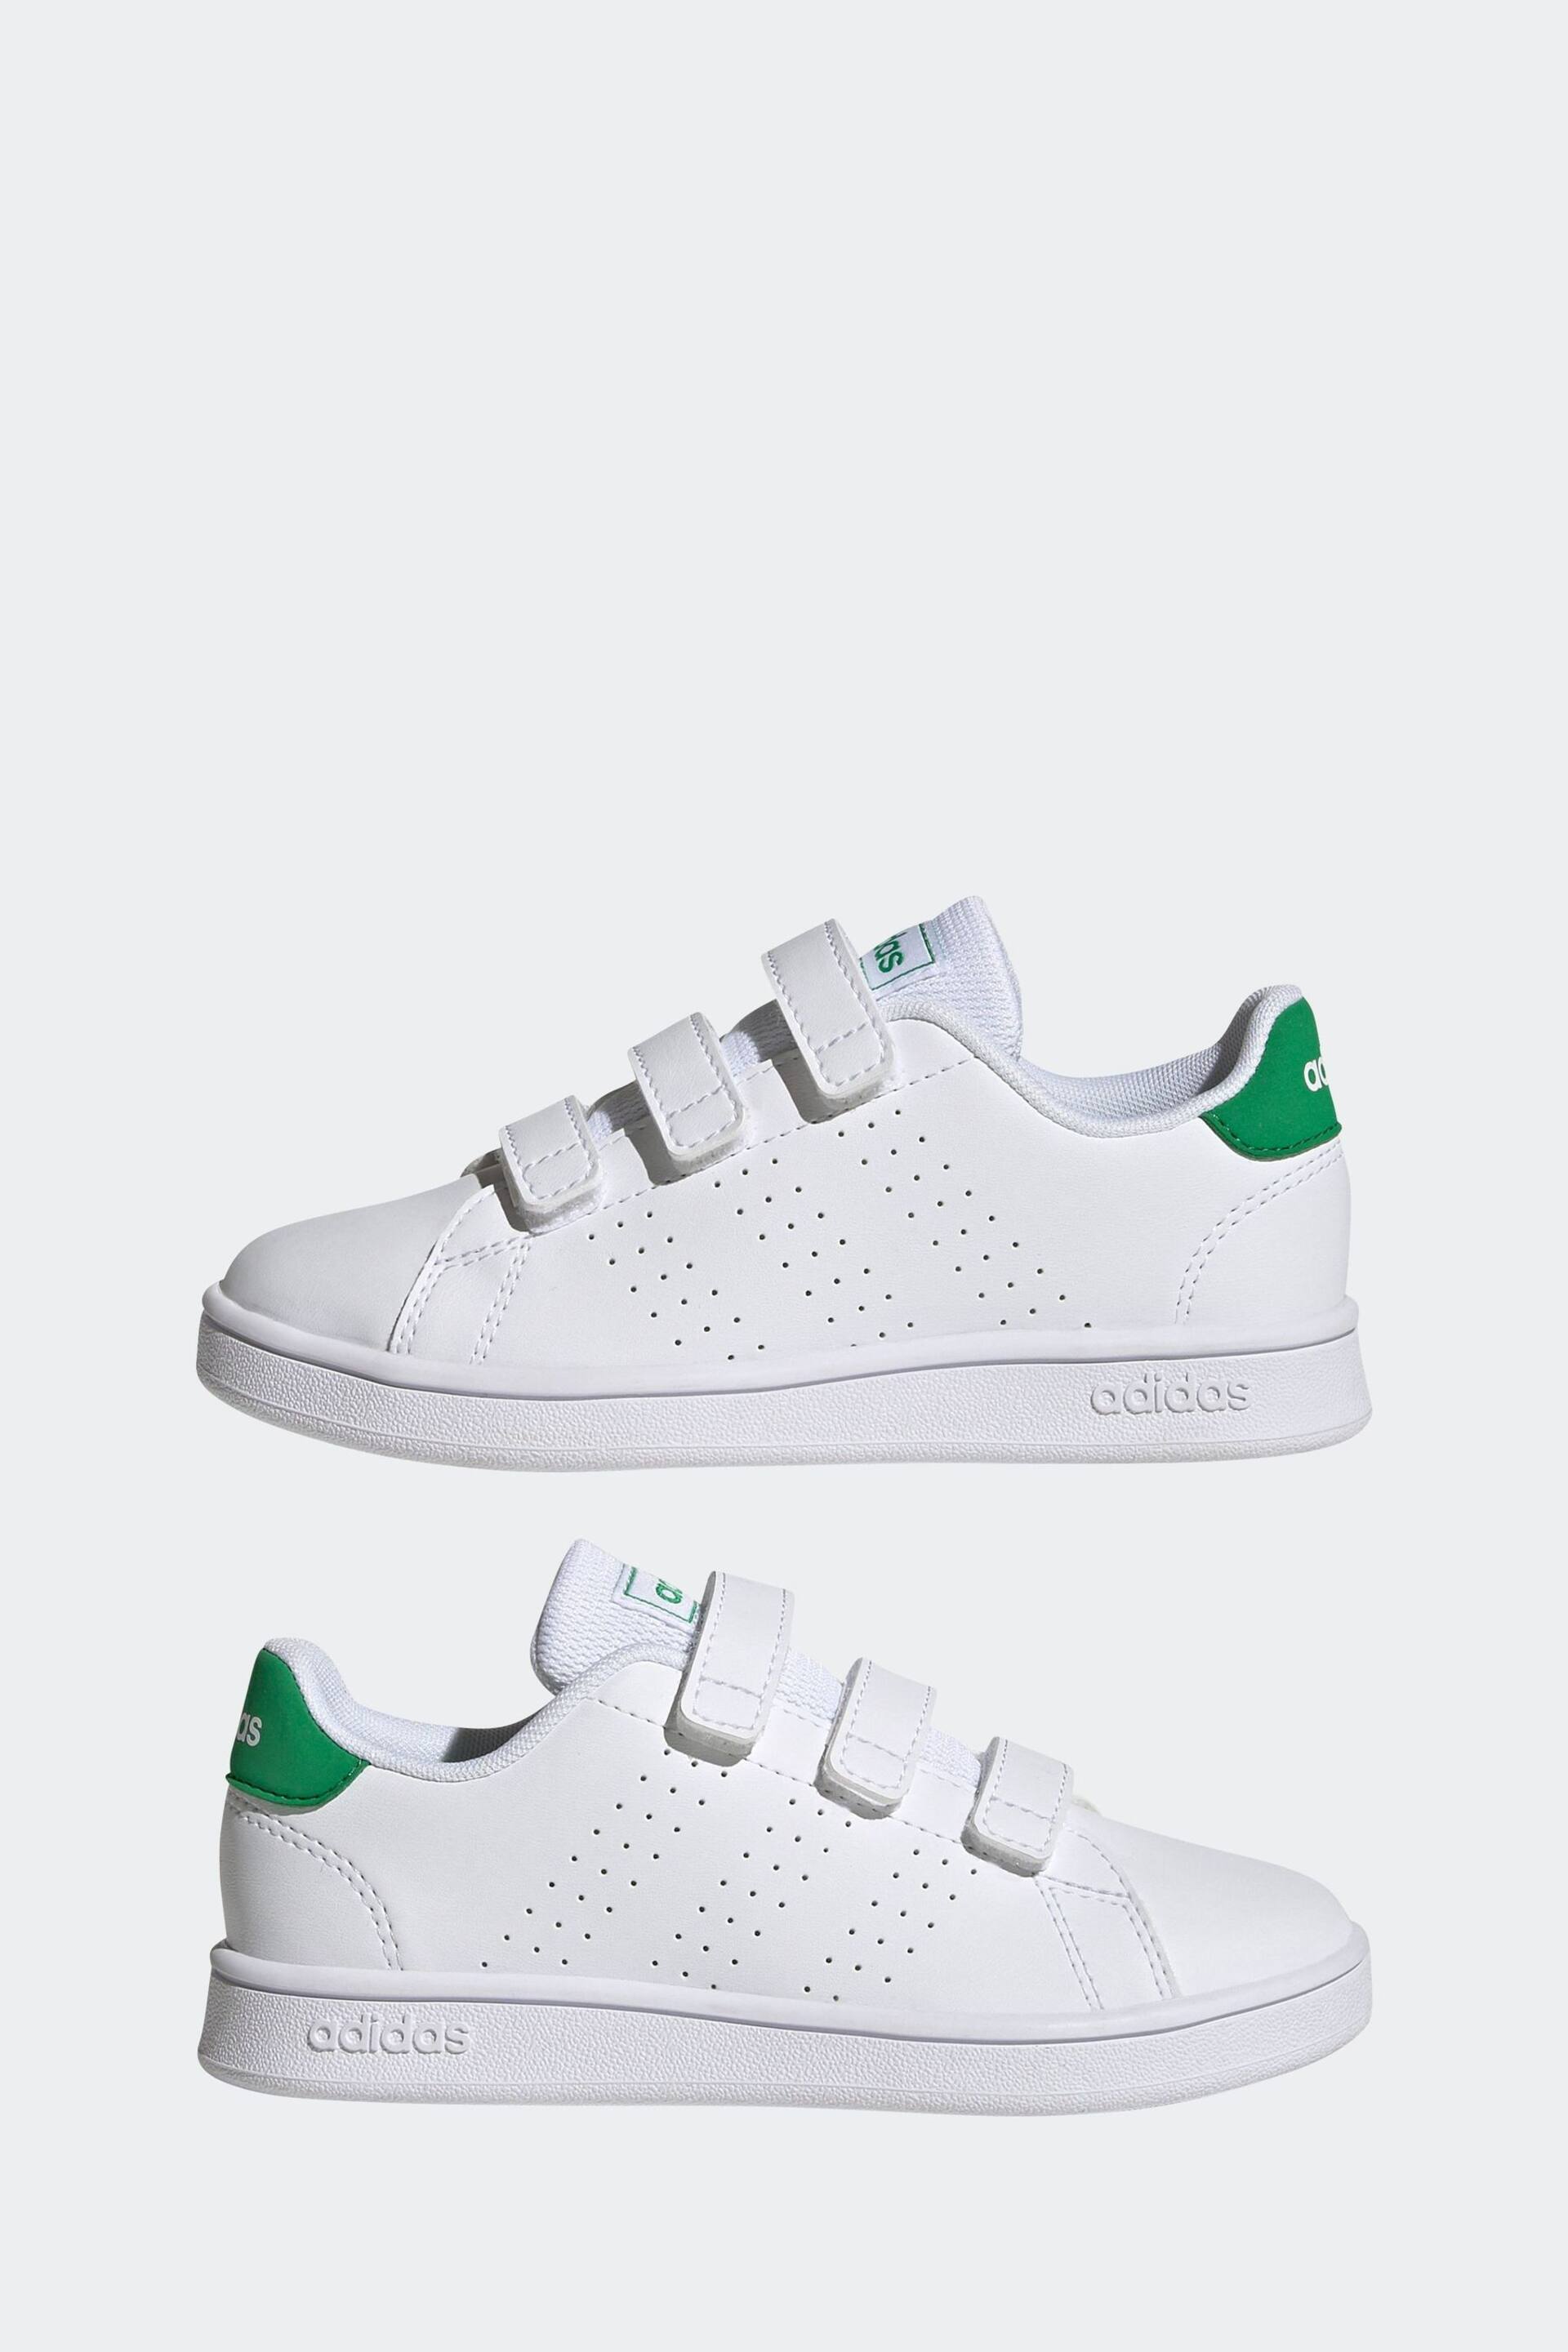 adidas Green/White Sportswear Advantage Court Lifestyle Hook And Loop Trainers - Image 5 of 9